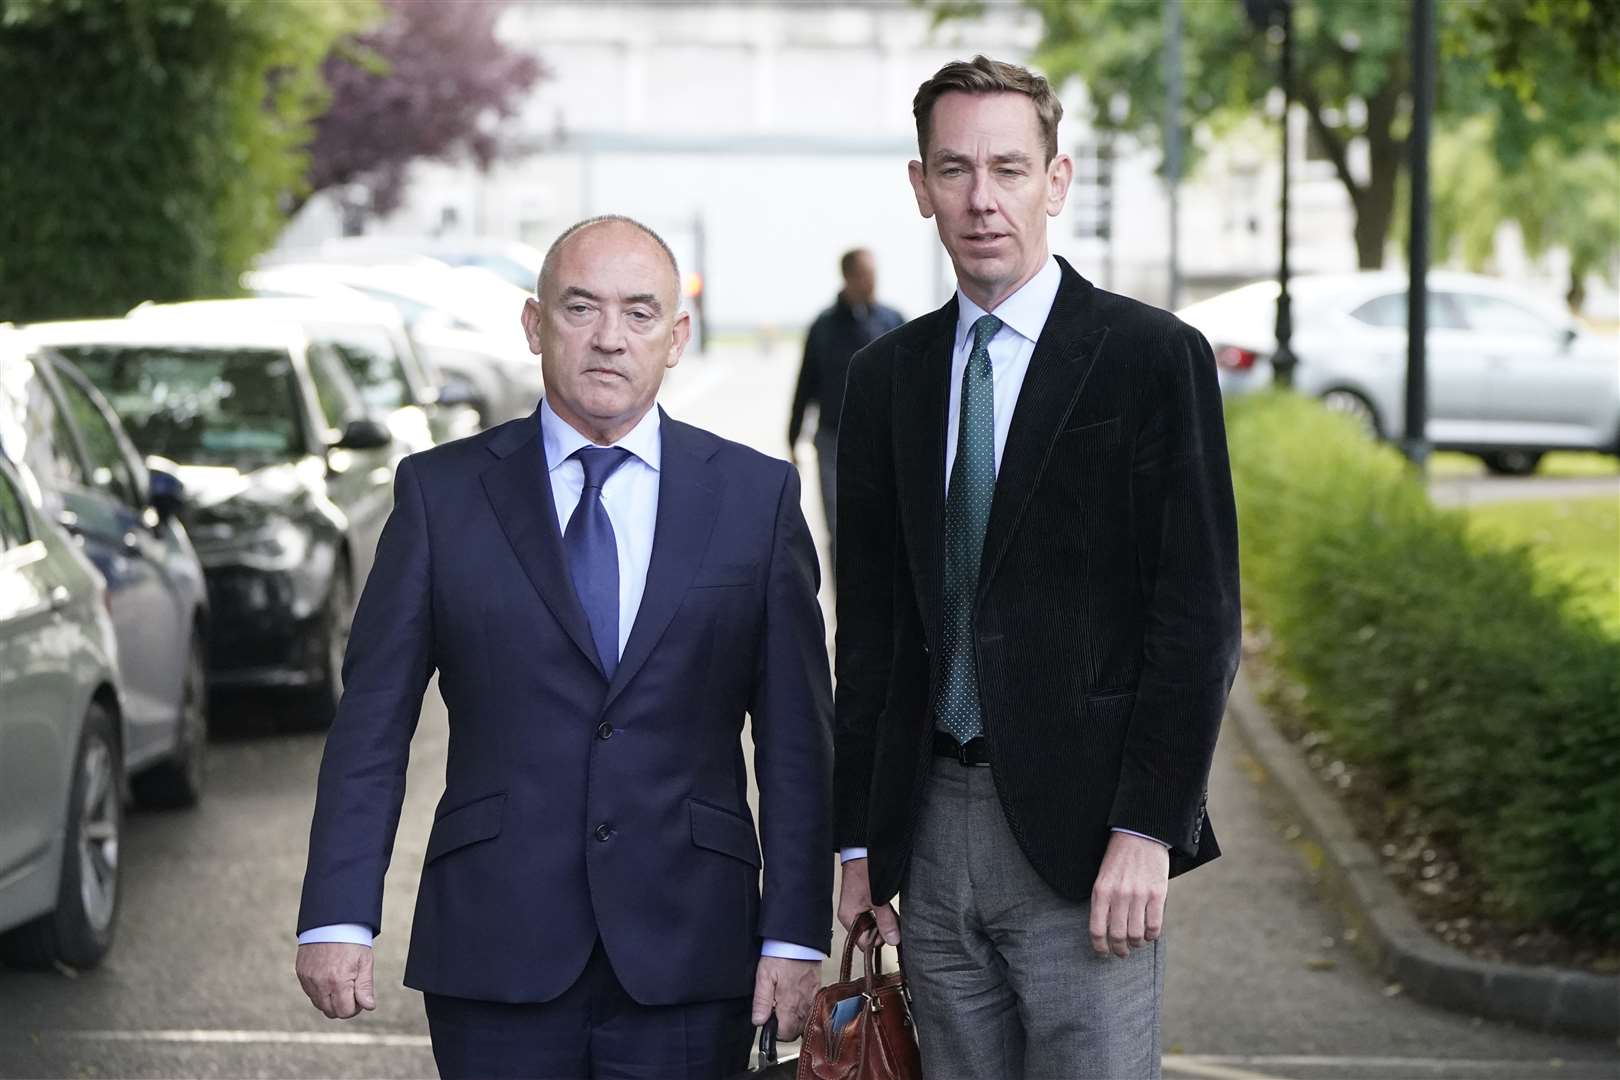 Ryan Tubridy (right) with his agent Noel Kelly leaving Leinster House in Dublin, where they gave evidence before two committees (Niall Carson/PA).